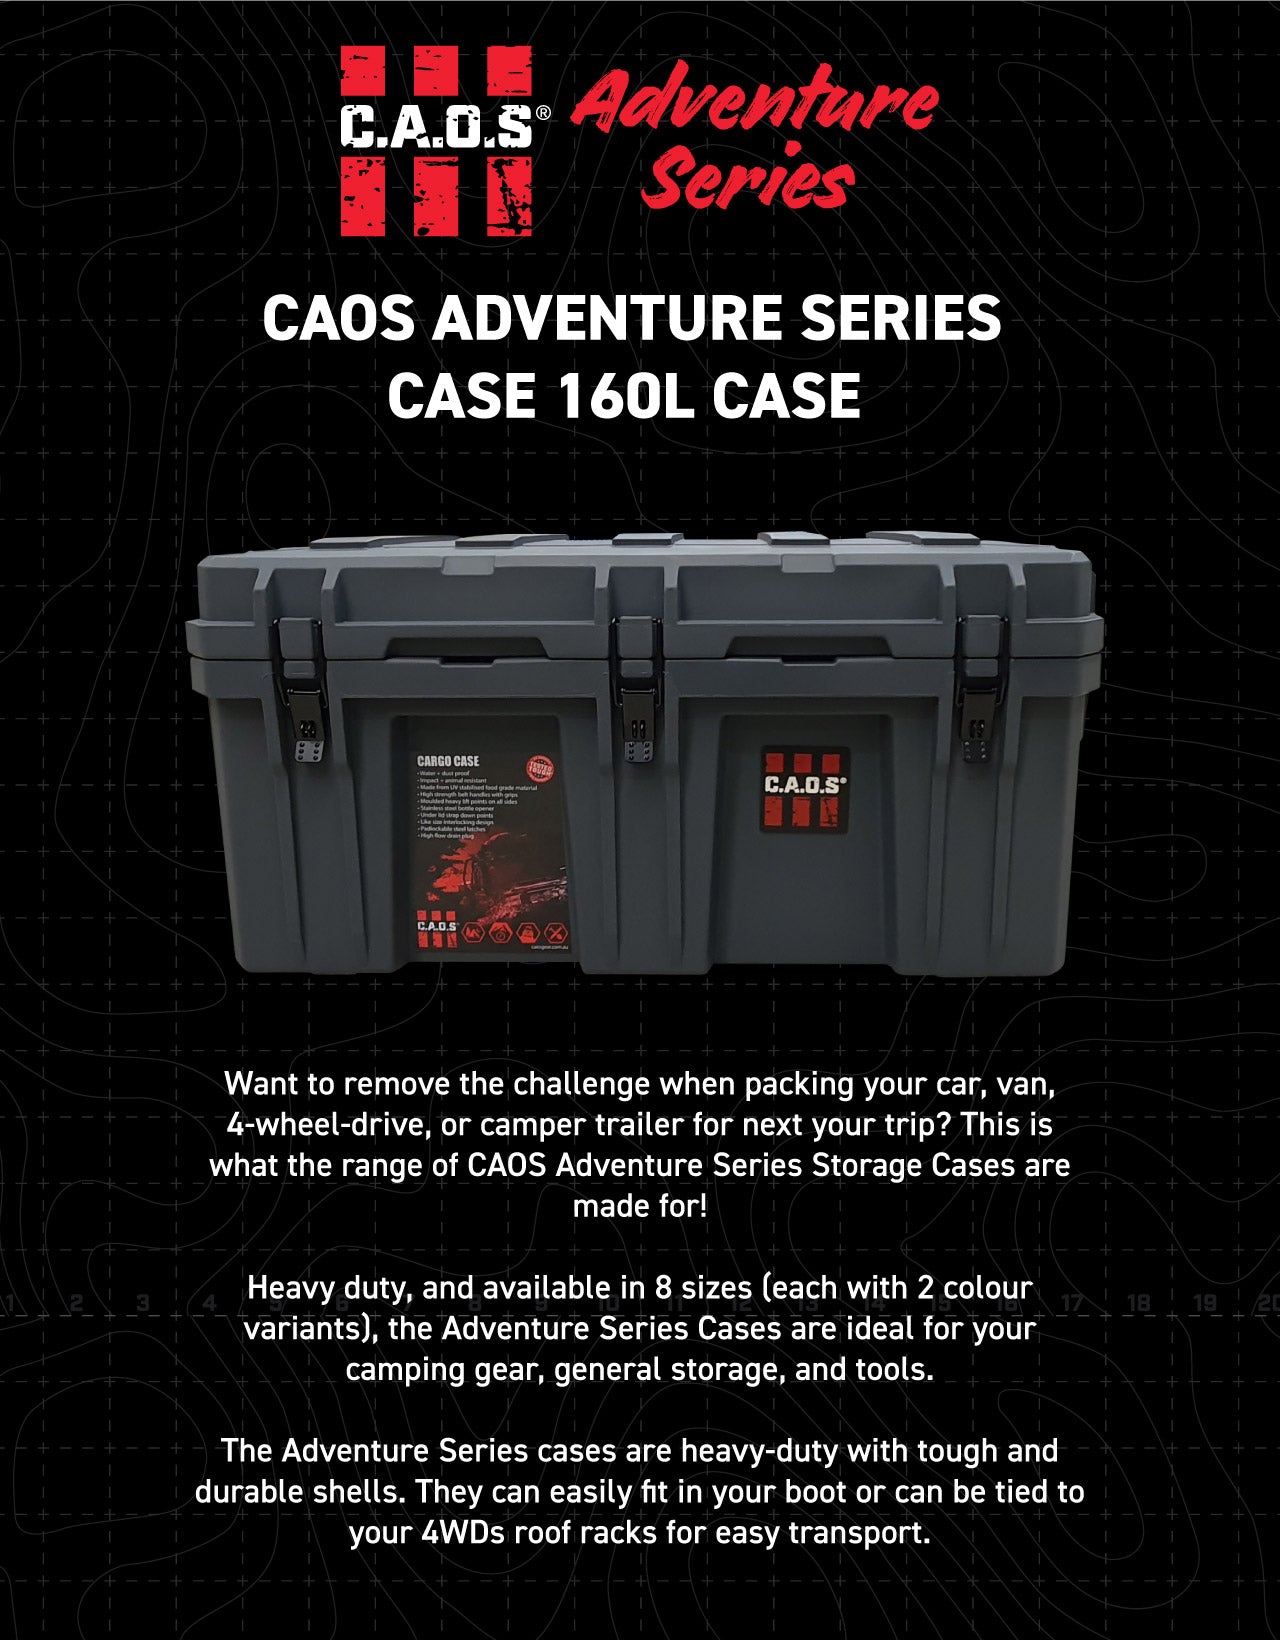 The Adventure Series cases are heavy-duty with tough and durable shells. They can easily fit in your boot or can be tied to your 4WDs roof racks for easy transport.